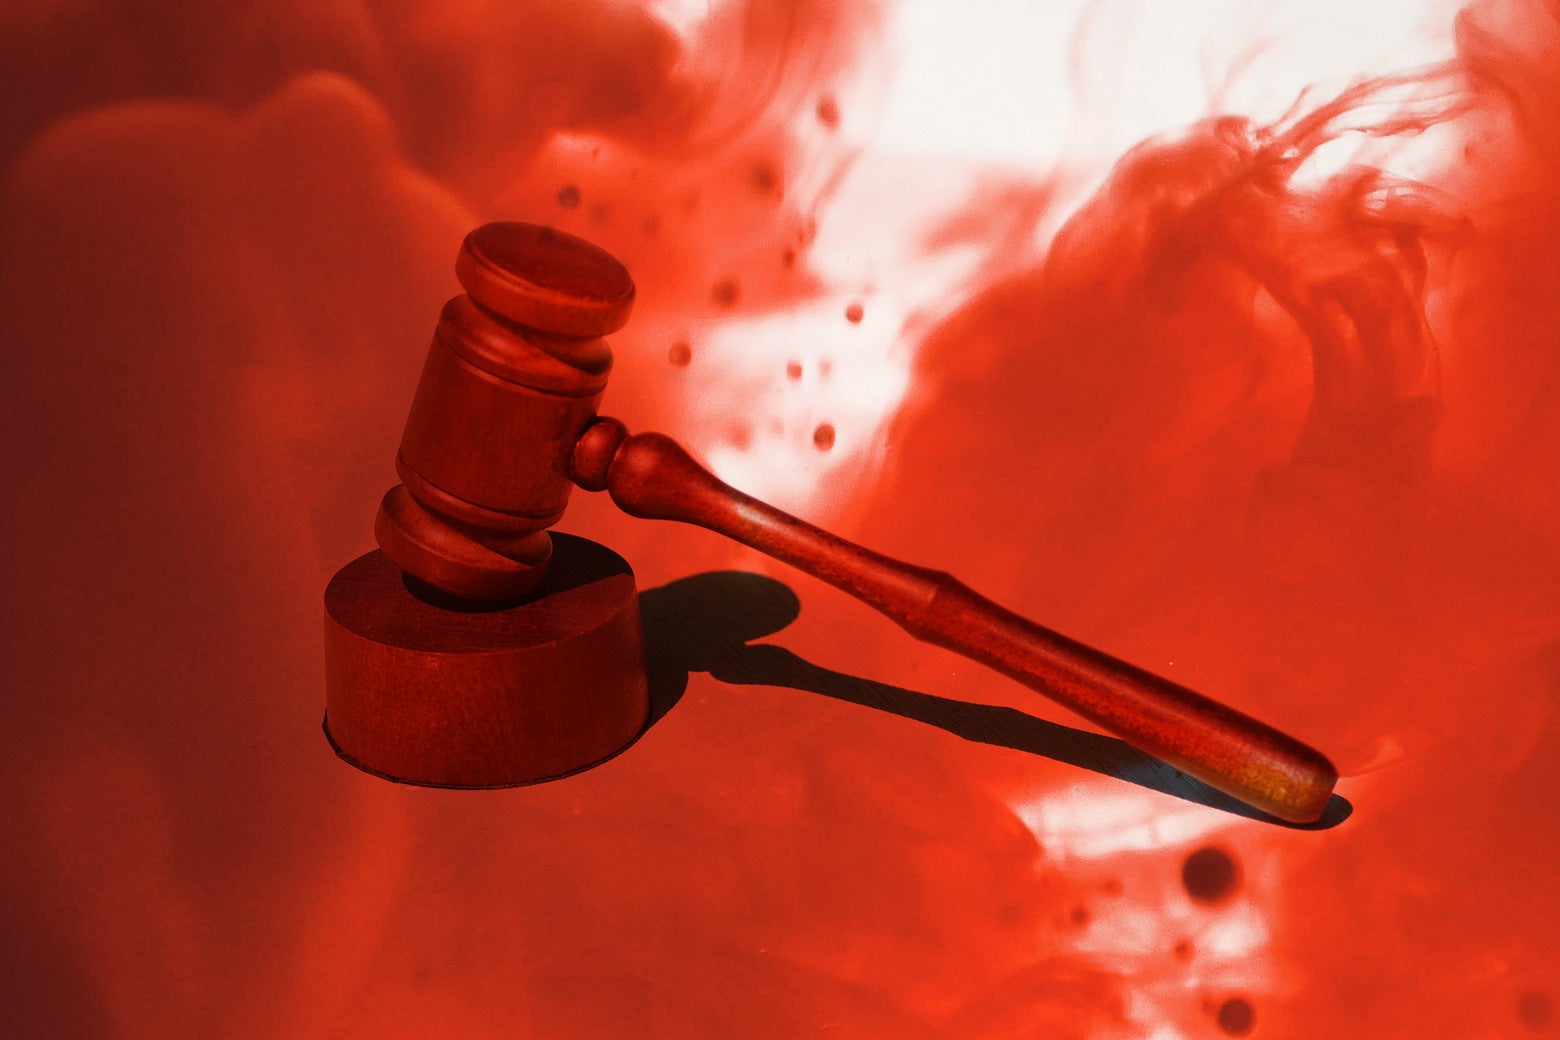 A gavel illustrated with a cloud of red that looks like blood